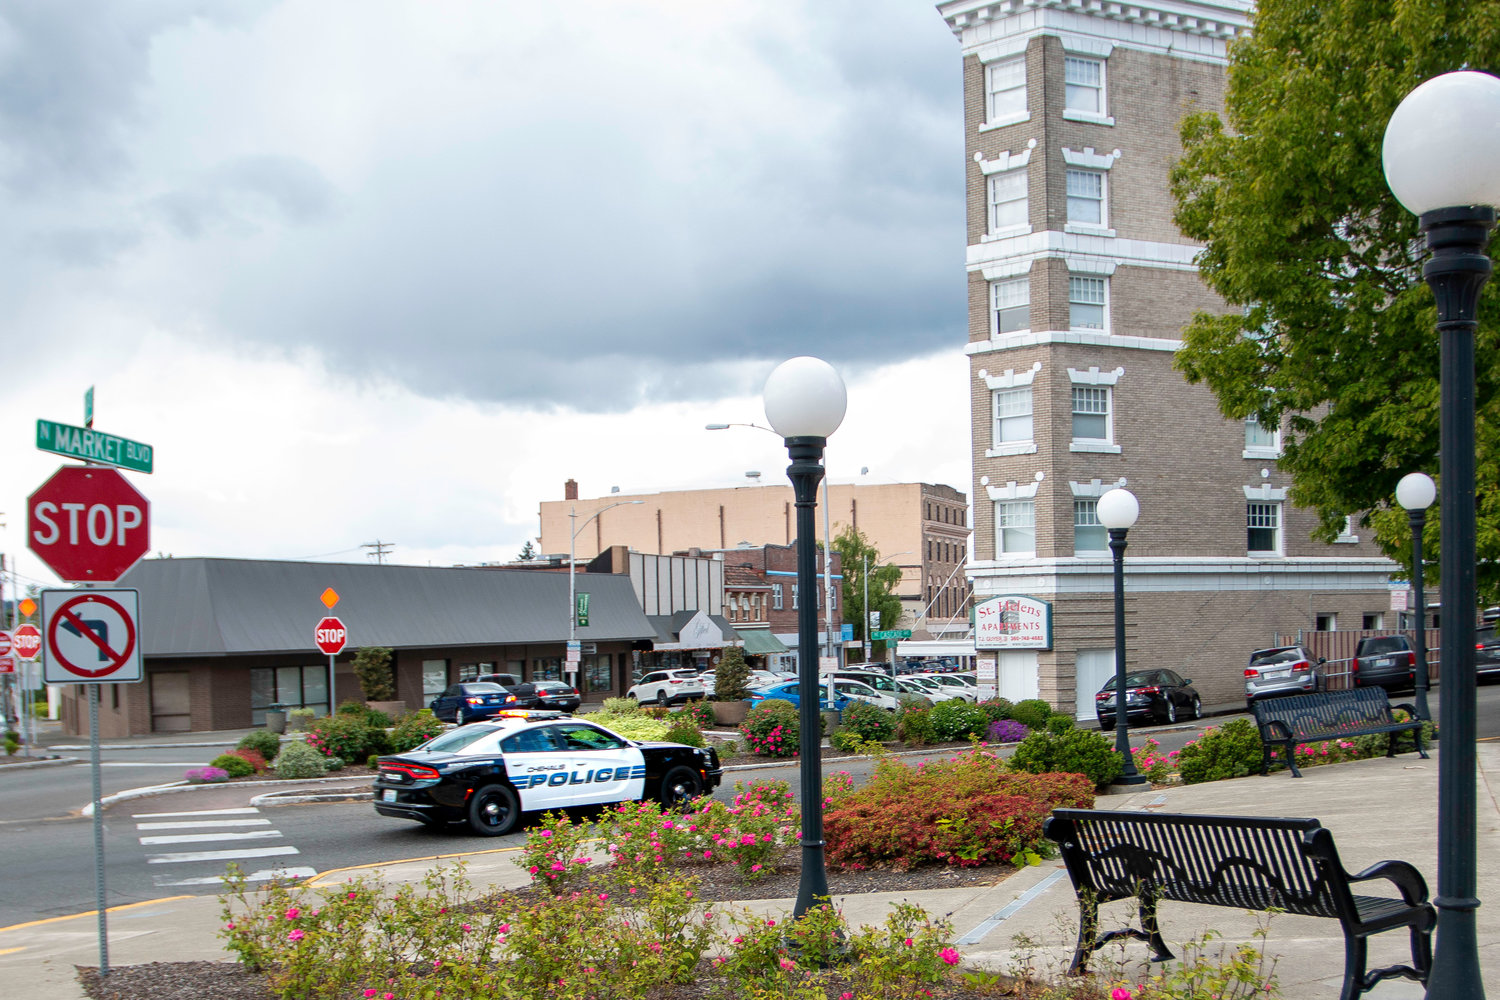 A Chehalis Police Department patrol car passes through the downtown area in this Chronicle file photo.